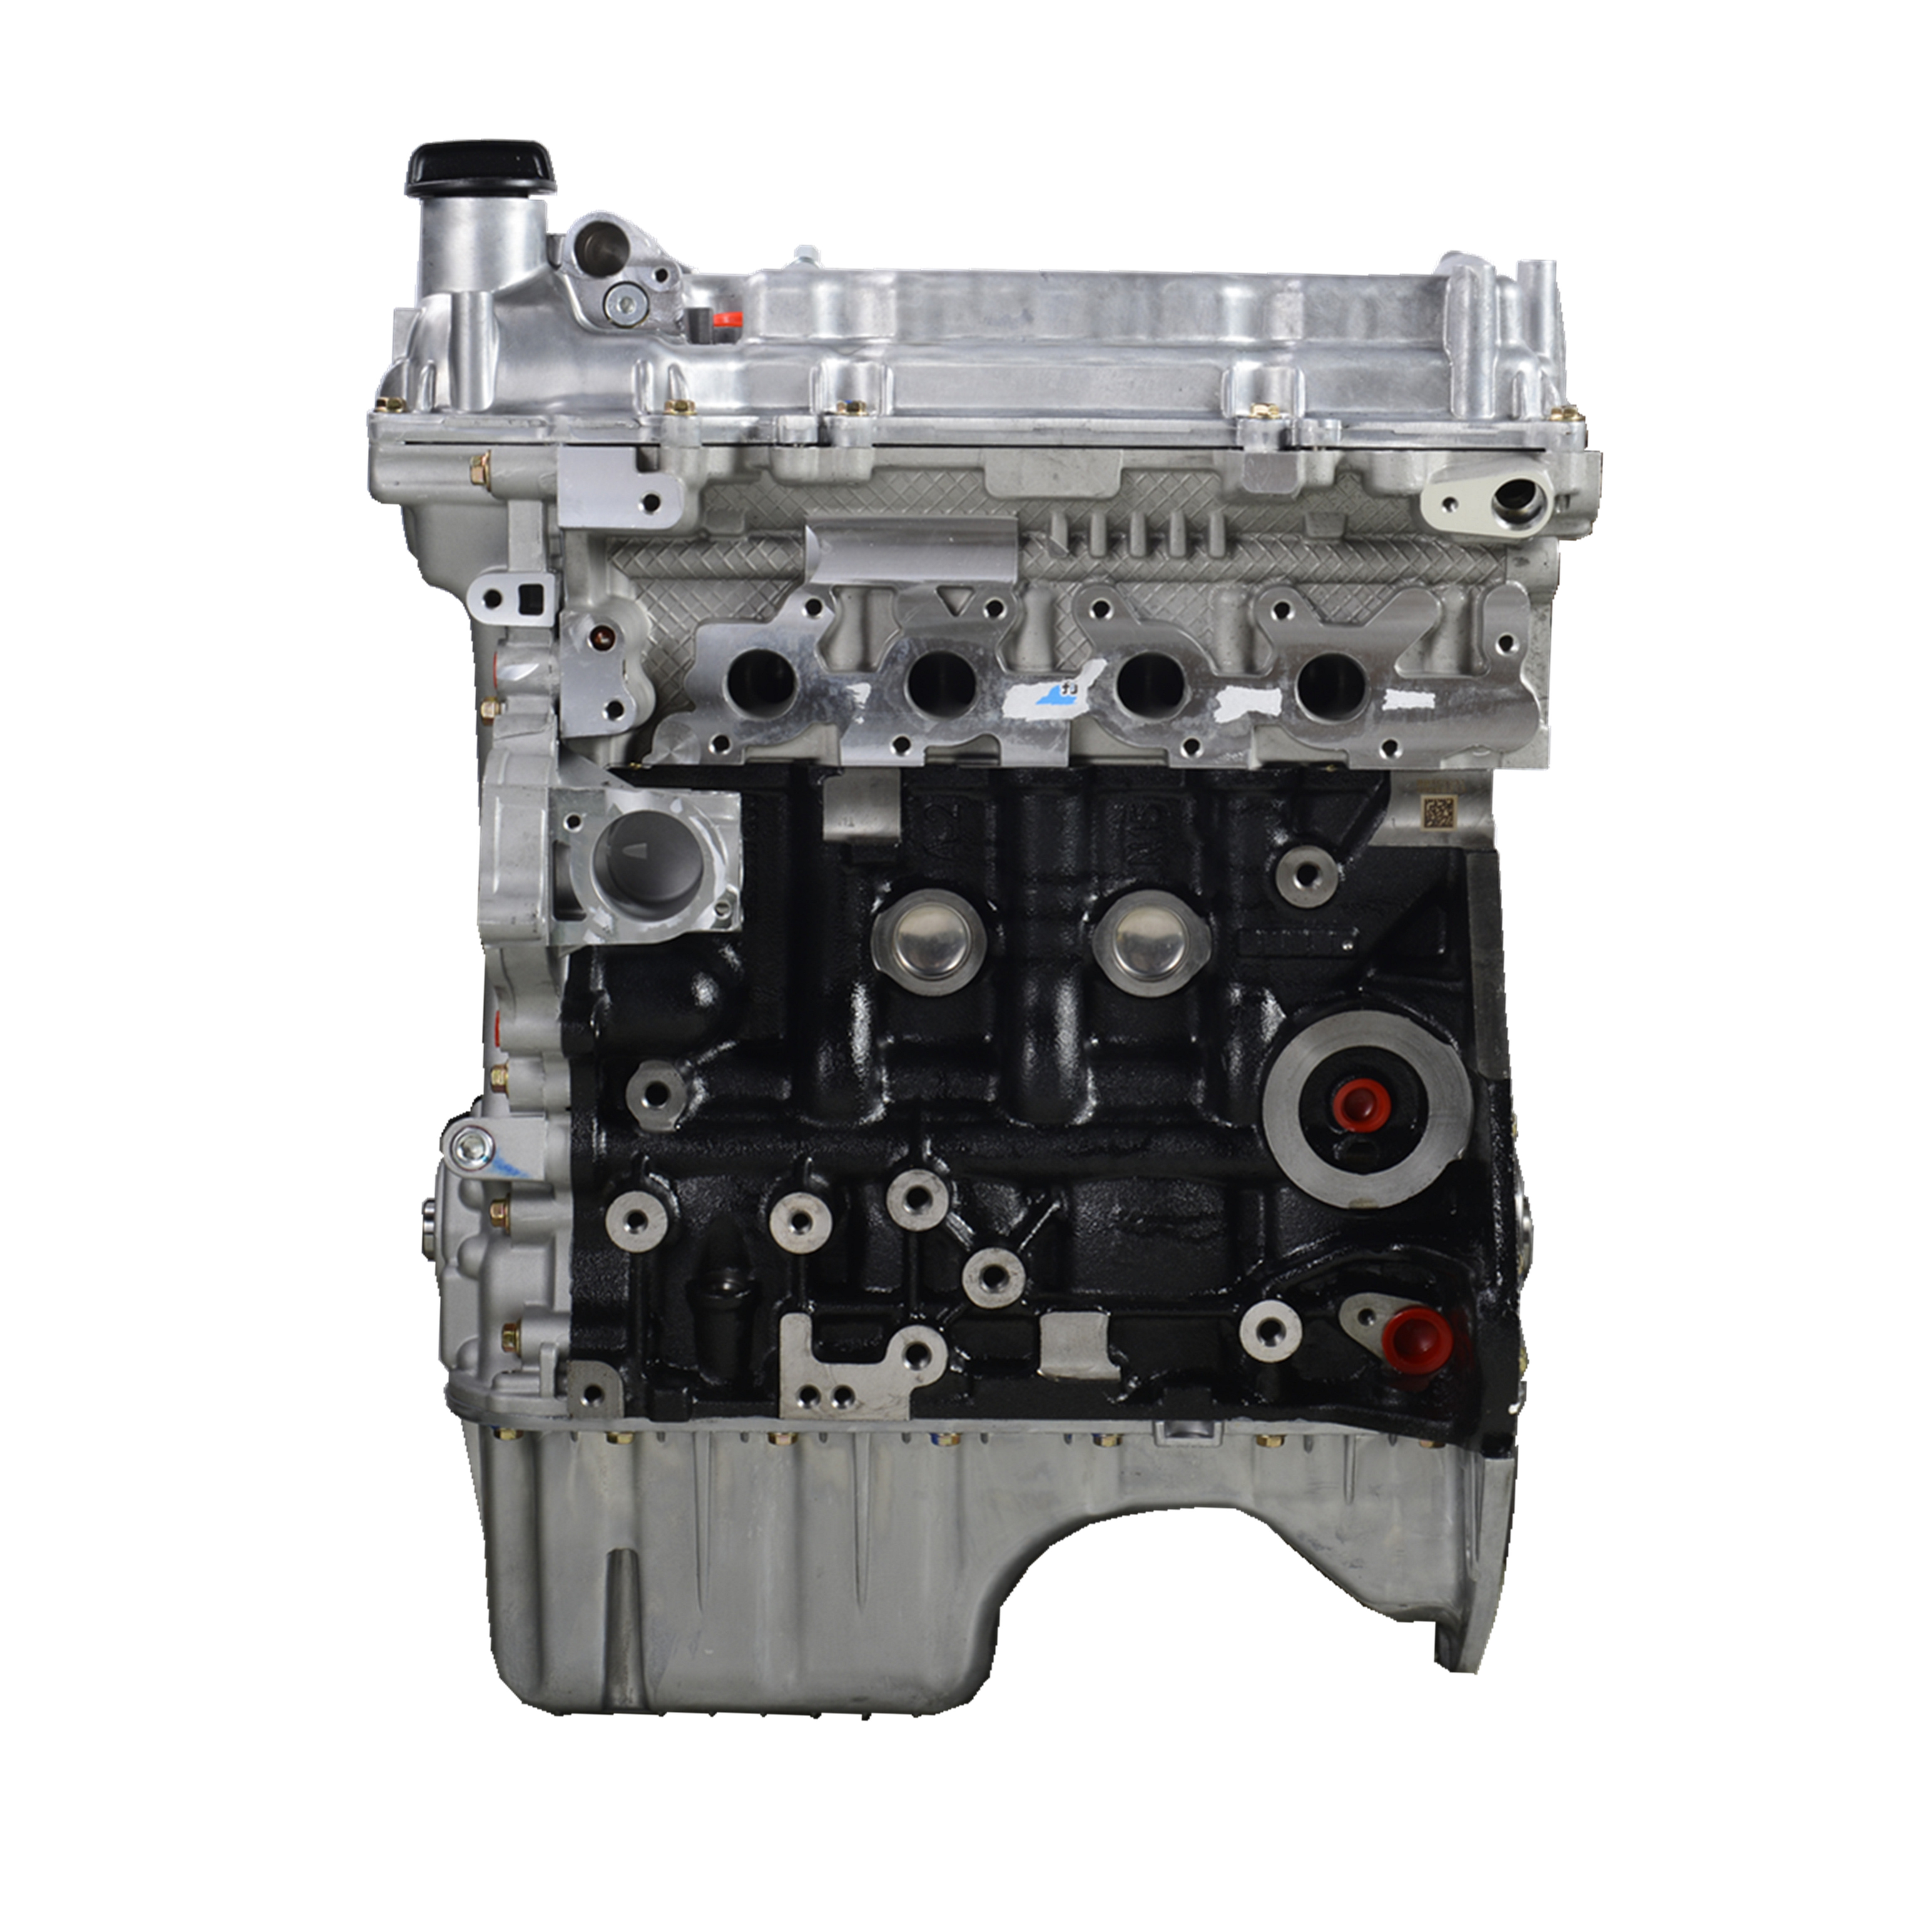 OEM/ODM Supplier	415A	 -
 KY1.5(L2B) -donganautoparts